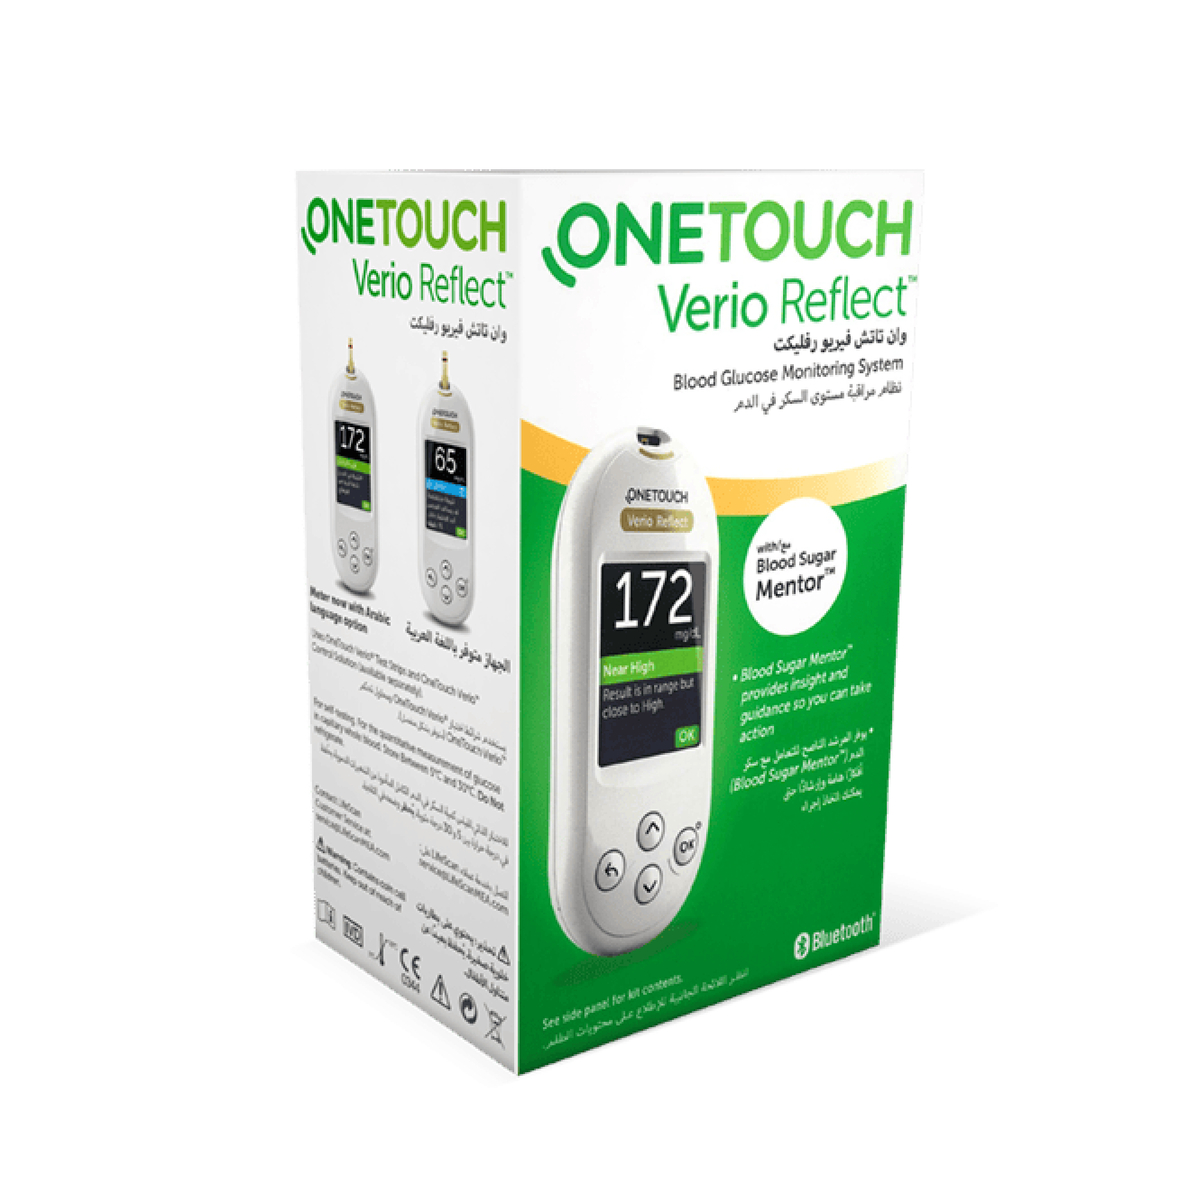 OneTouch Verio Reflect Glucose Monitor